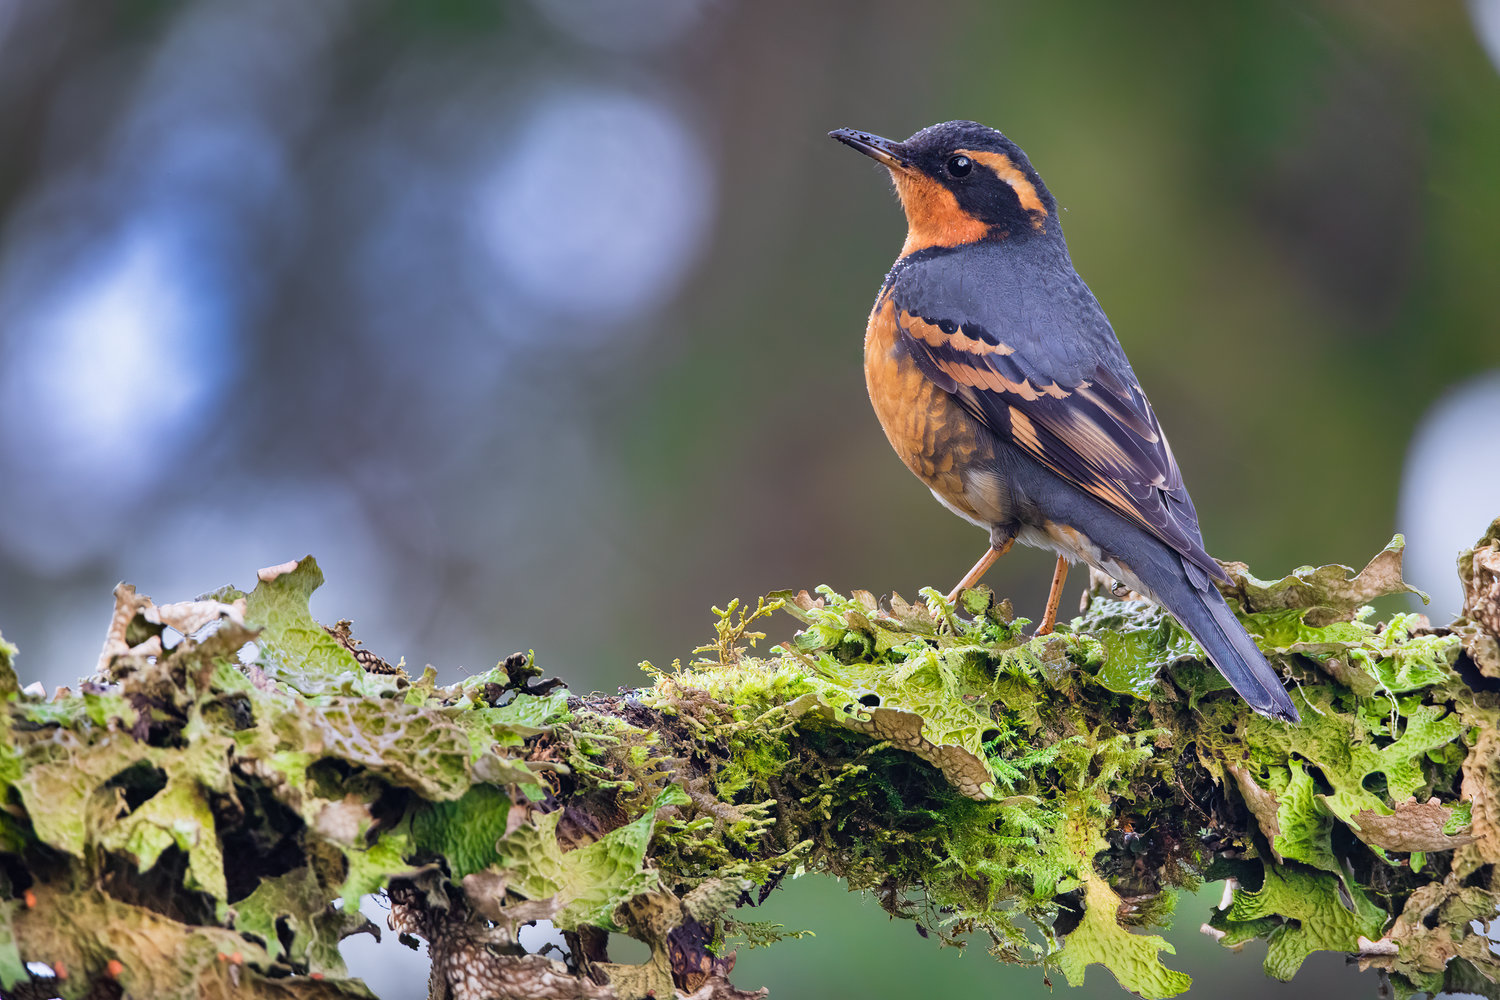 This is the Varied Thrush.